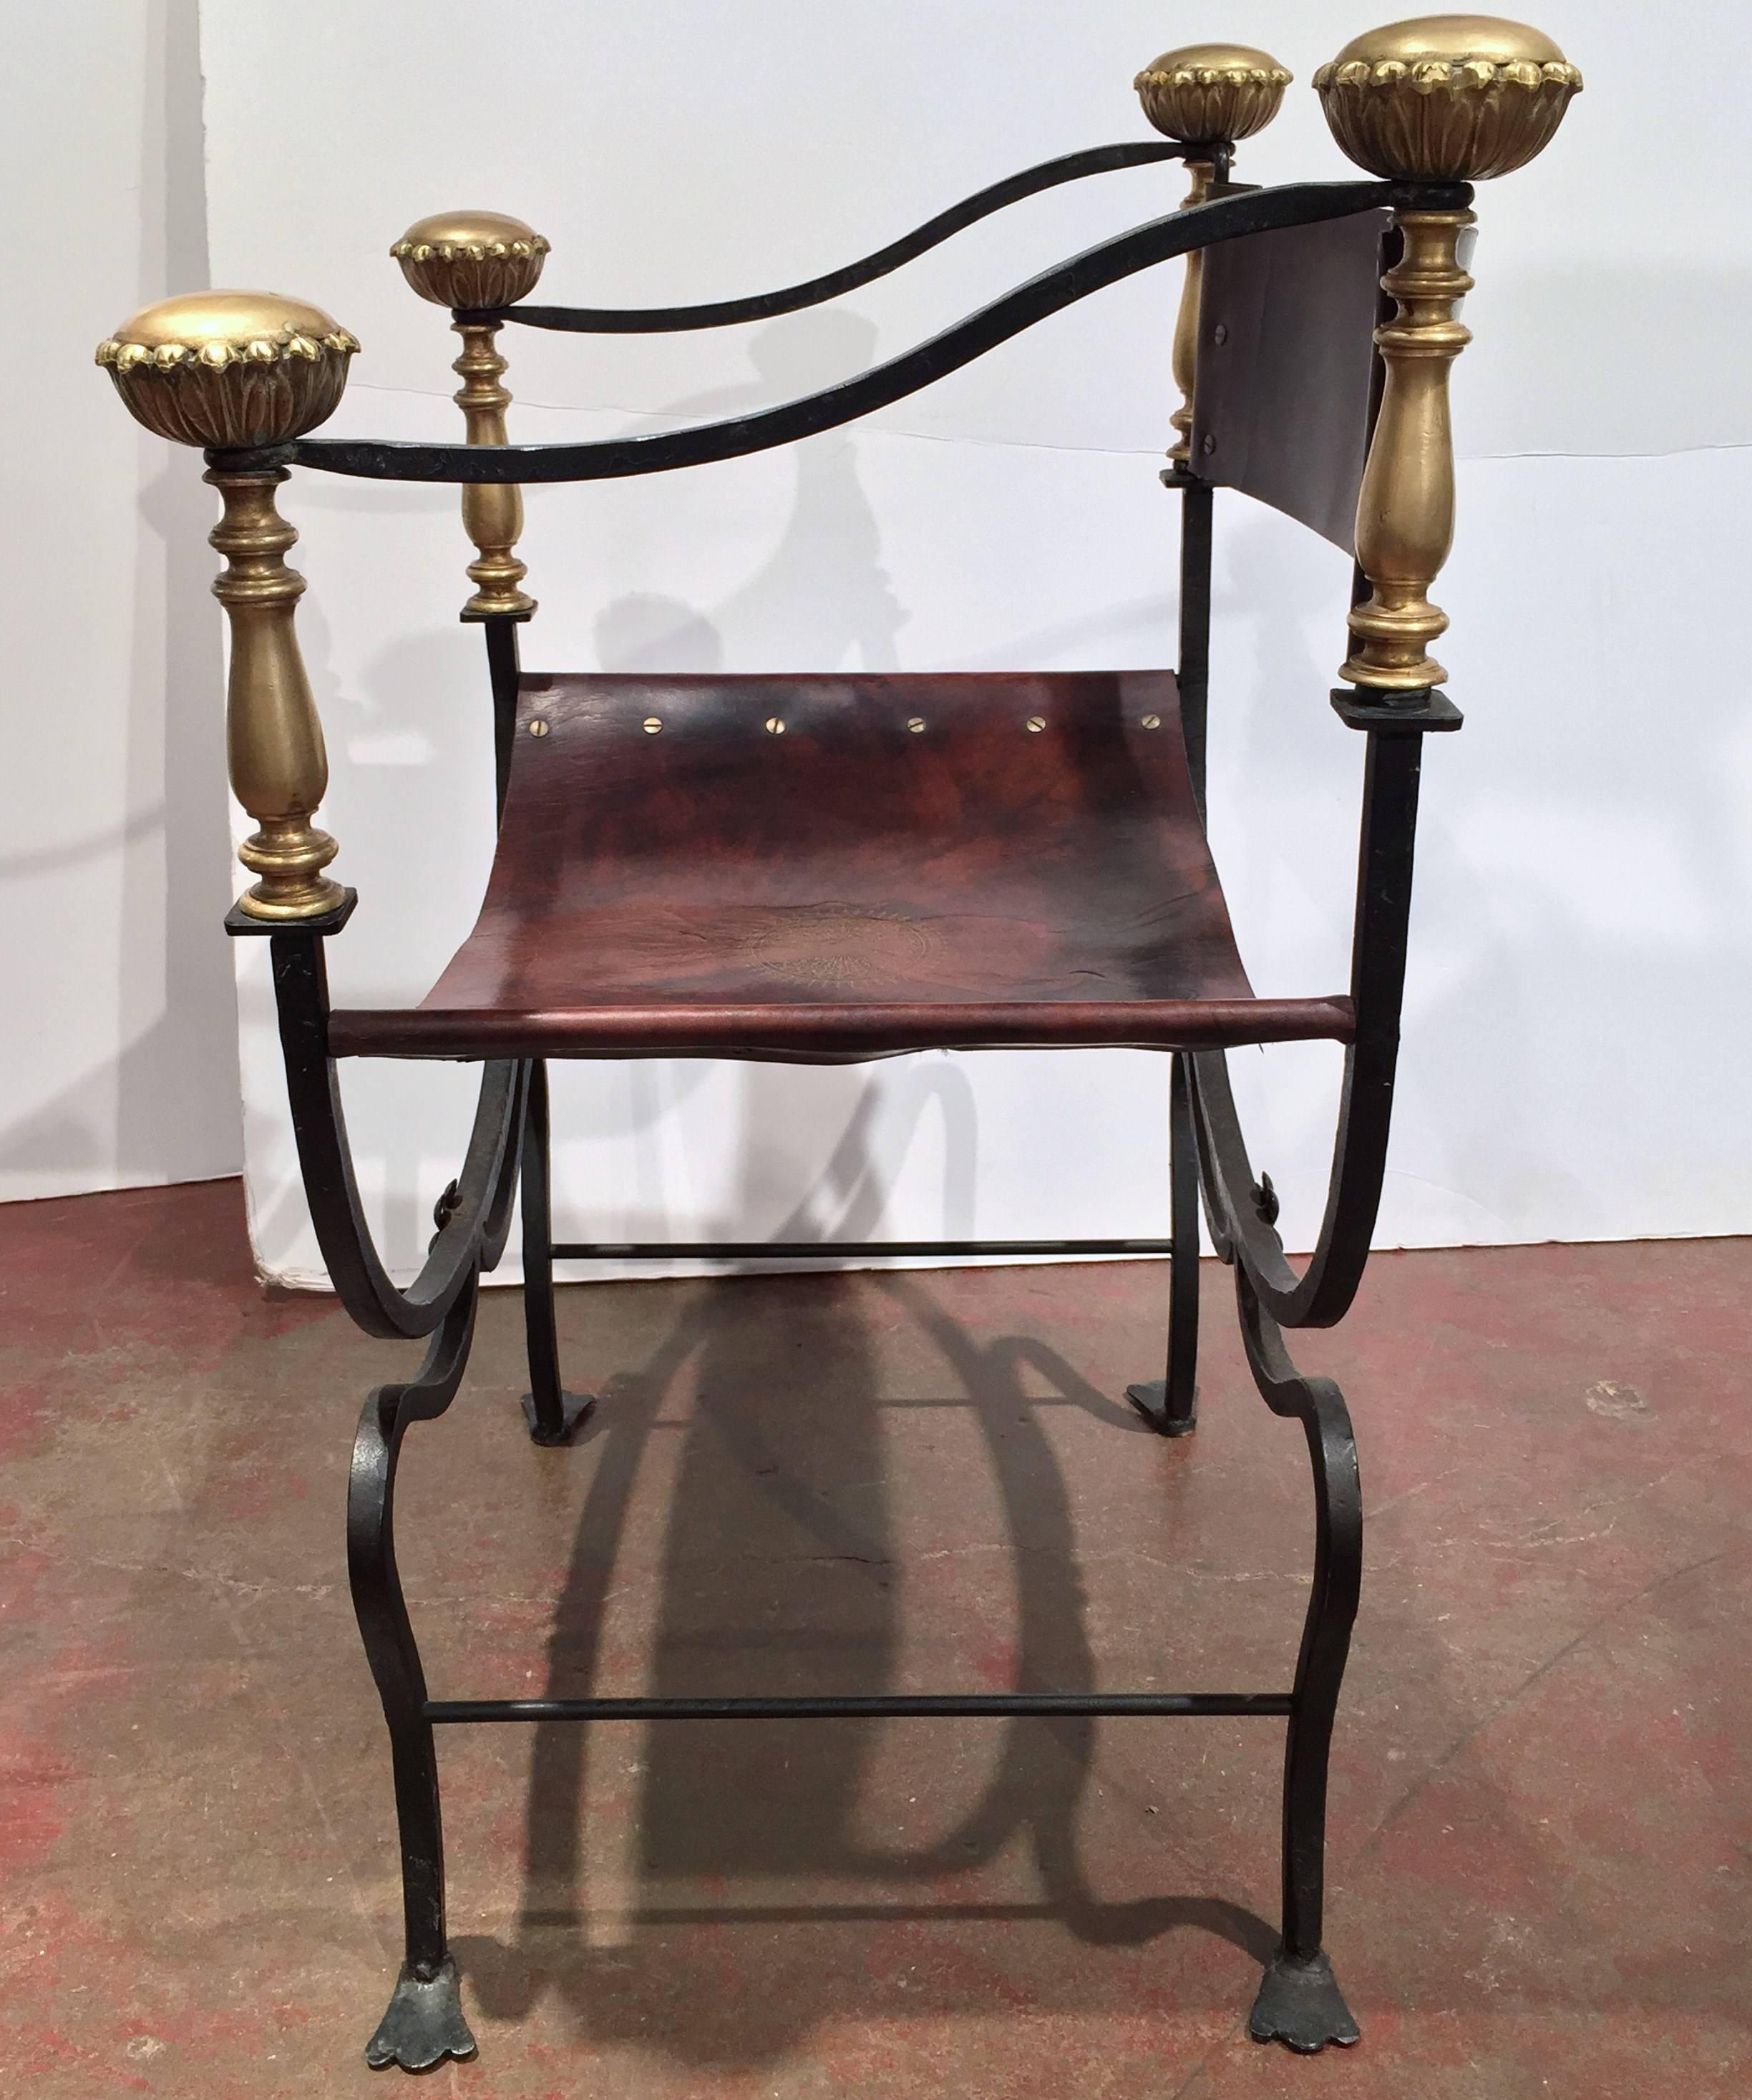 Bronze Pair of 19th Century Italian Campaign Wrought Iron Chairs with Original Leather